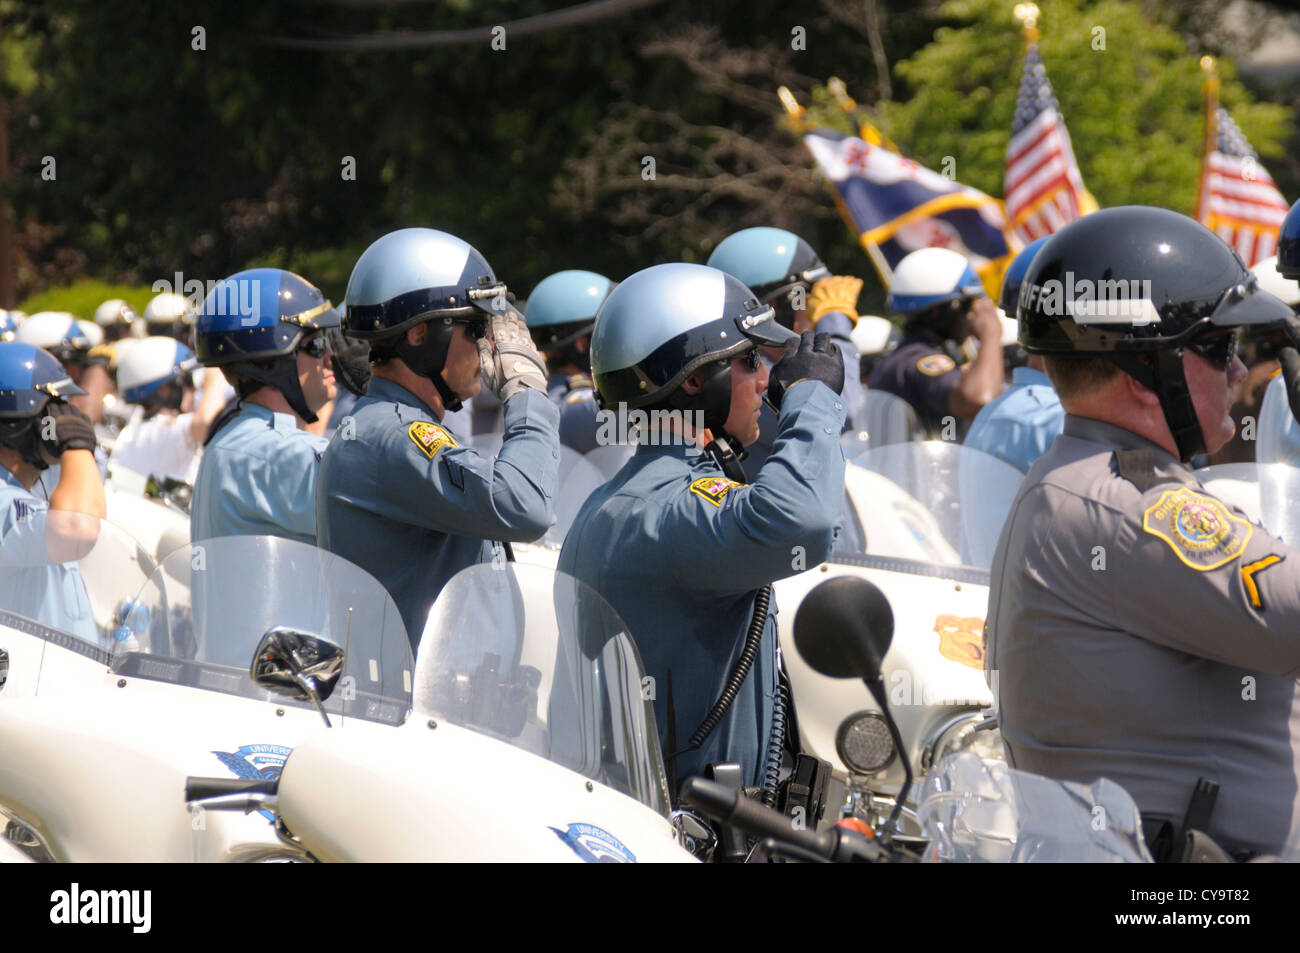 Police salute at a policeman's funeral in Beltsville, Maryland Stock Photo